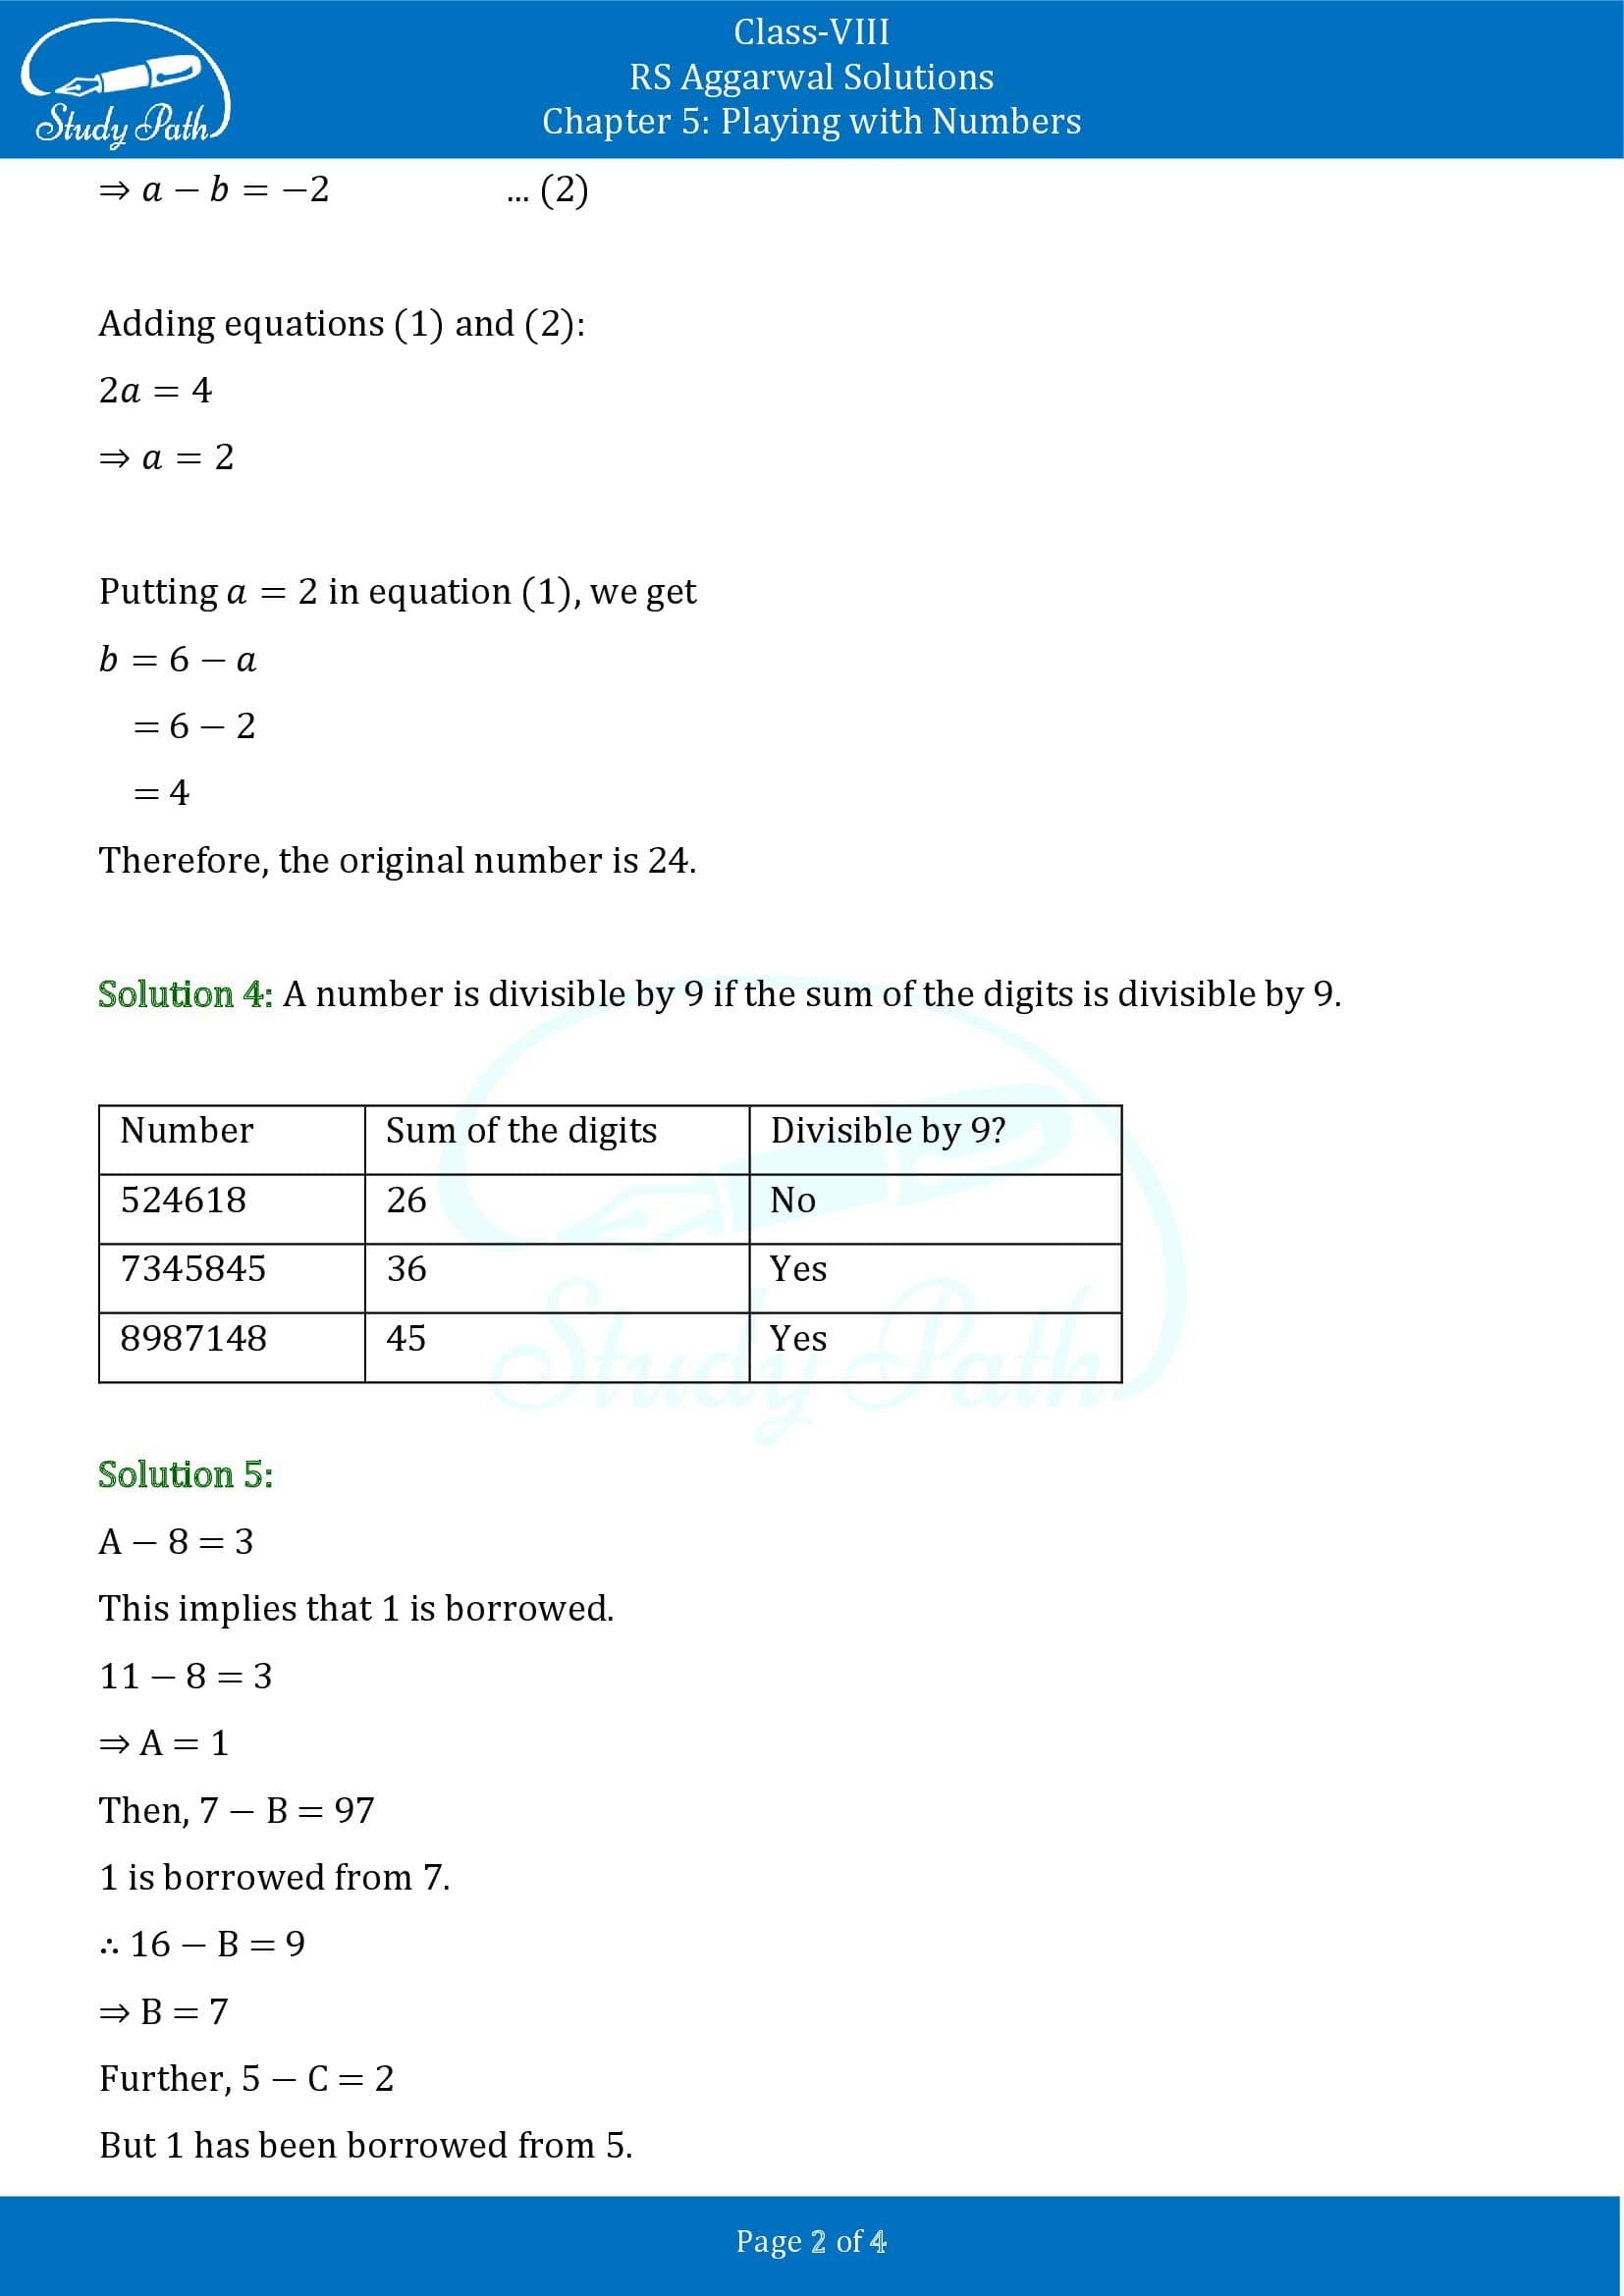 RS Aggarwal Solutions Class 8 Chapter 5 Playing with Numbers Test Paper 00002